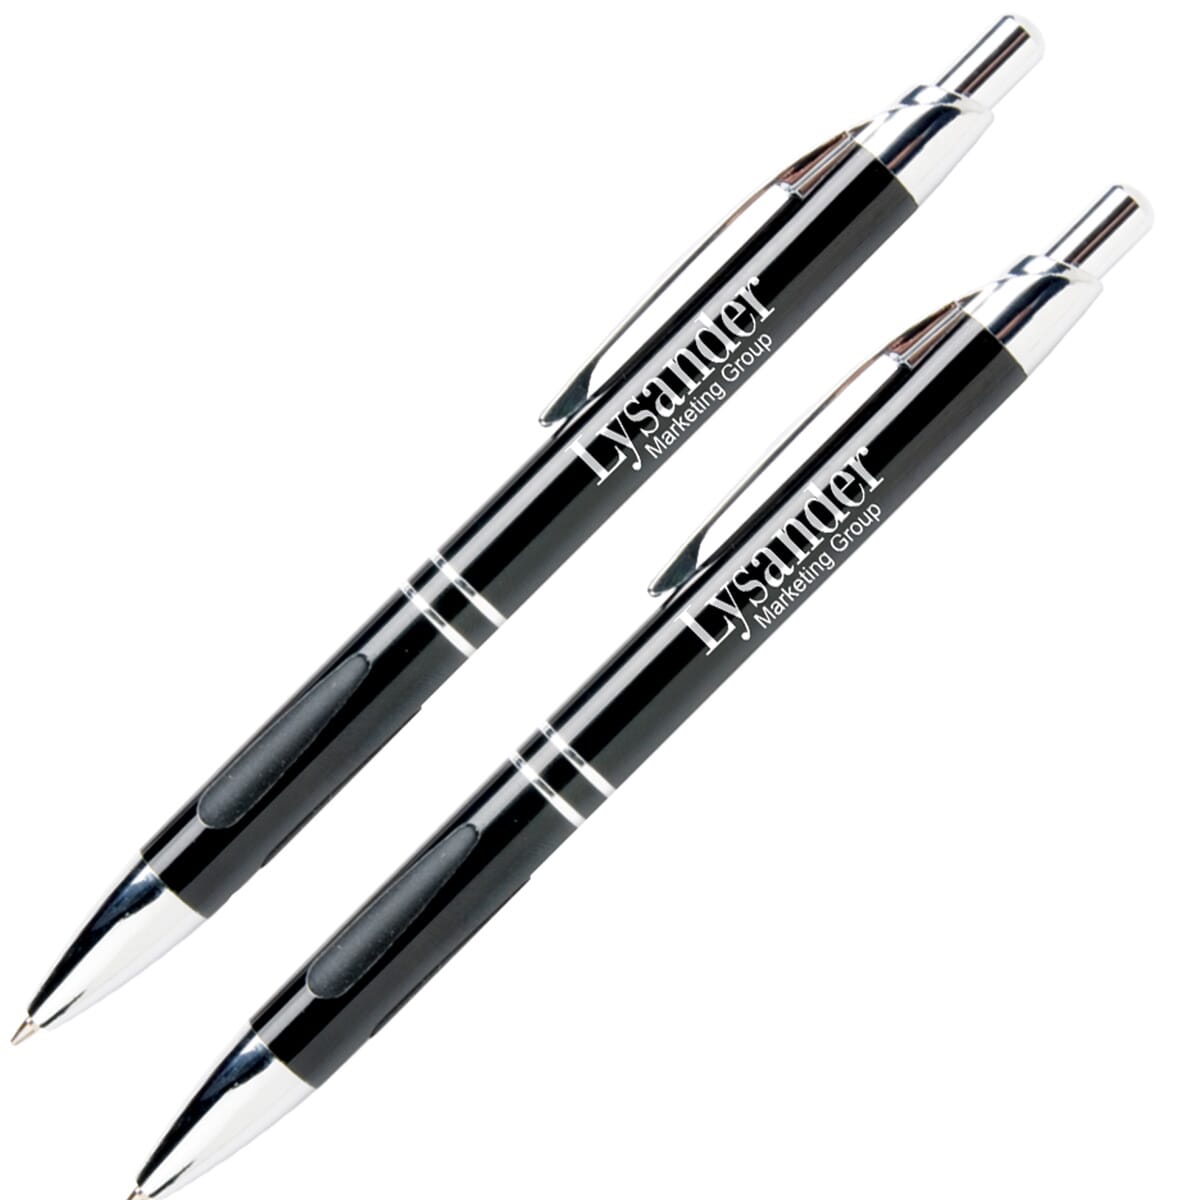 Black metal pen and pencil gift set with corporate logo